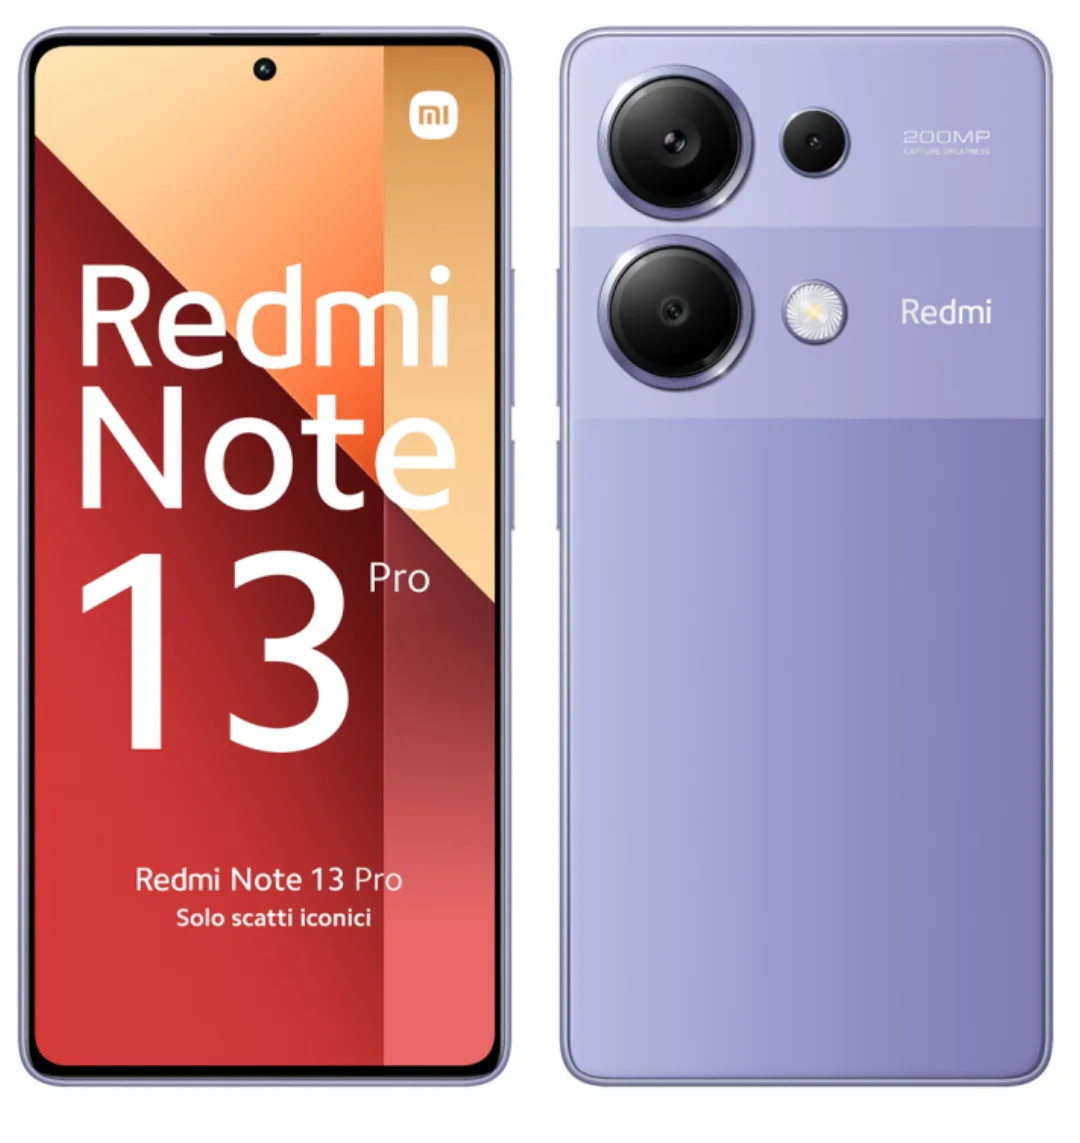 Redmi Note 13 4G and Note 13 Pro 4G Specifications Leaked Ahead of Debut